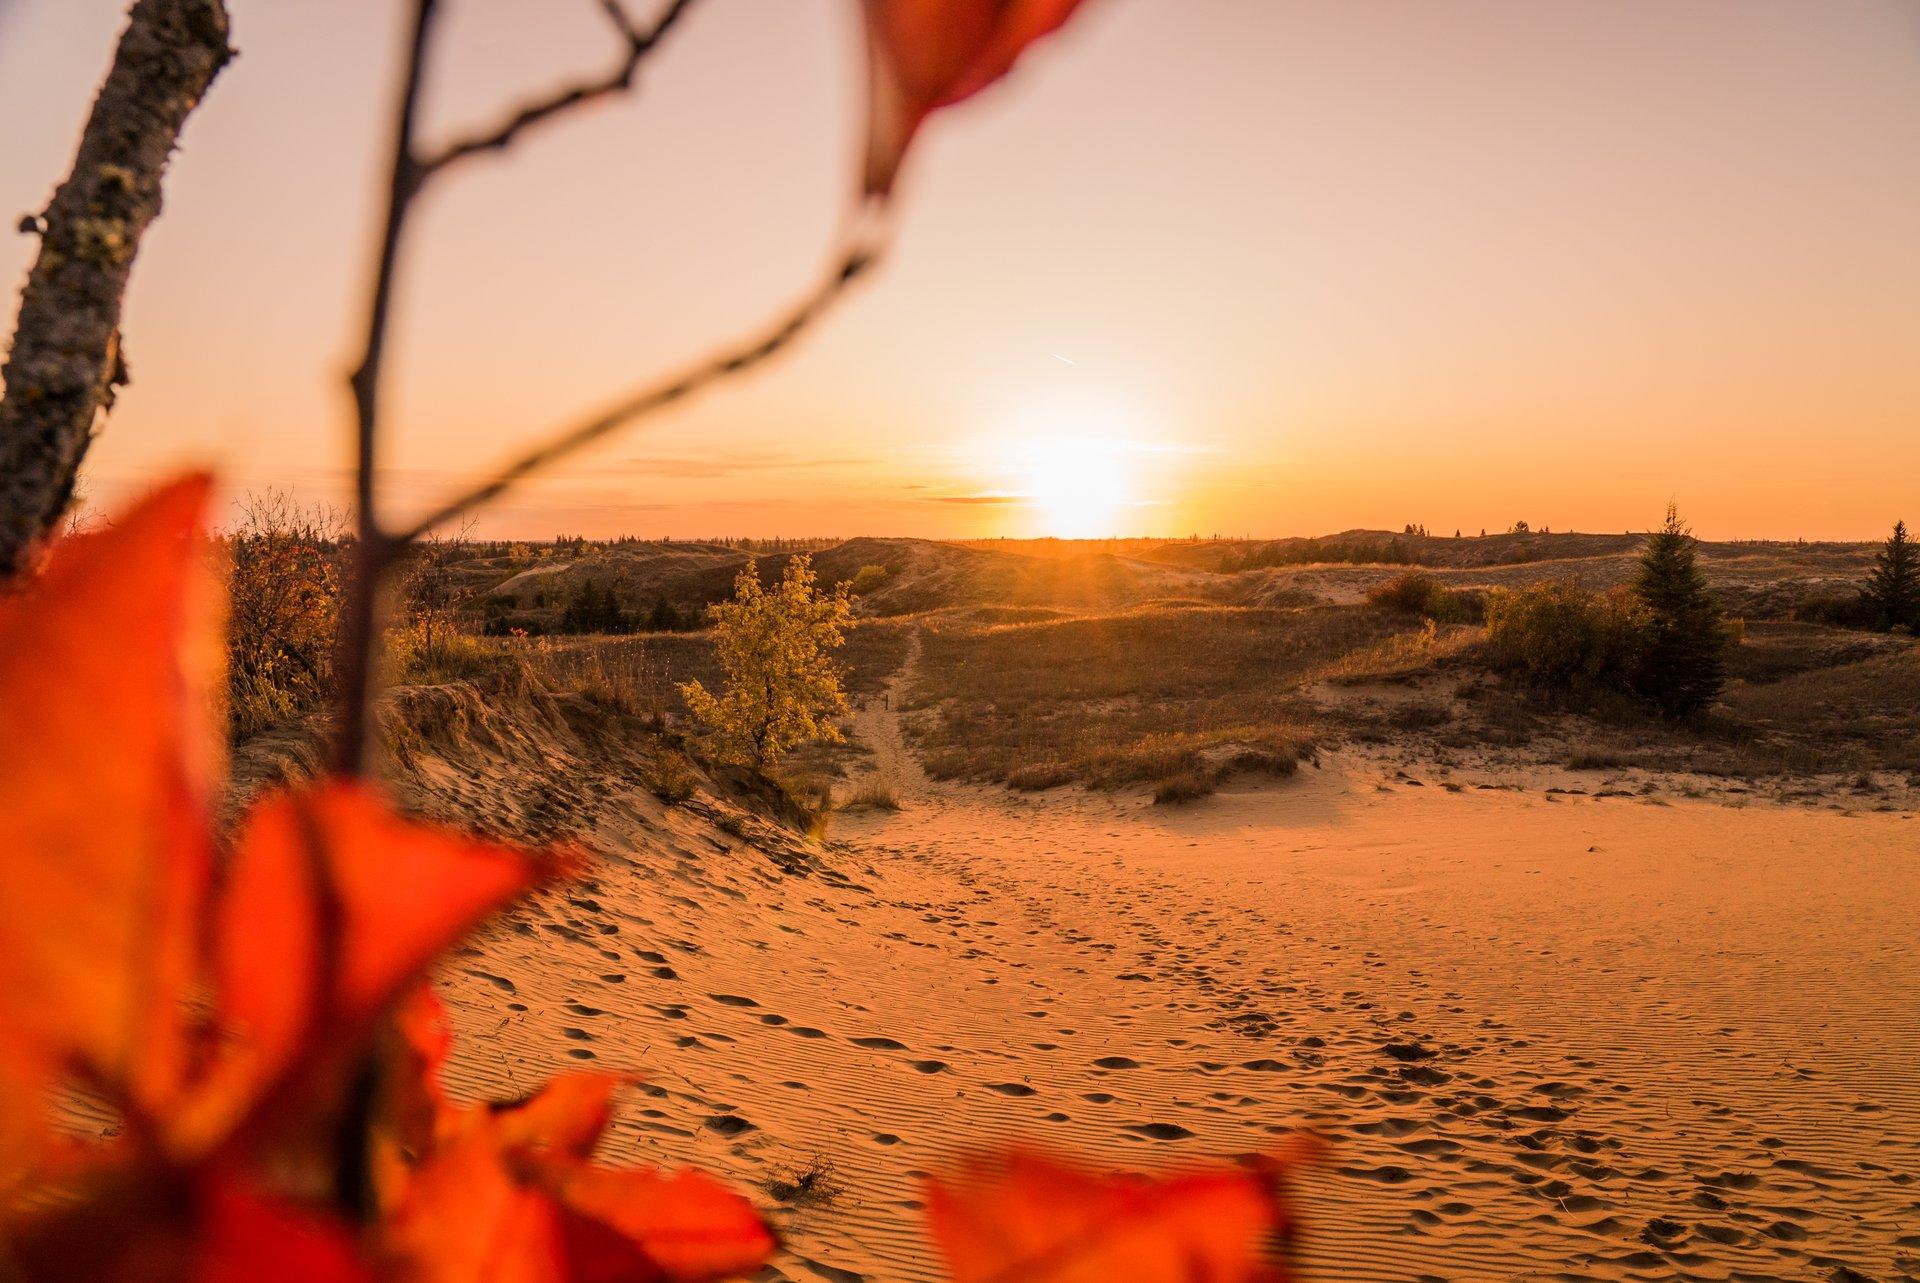 Spirit Sands Self-guiding Trail in Spruce Woods Provincial Park - credit: Travel Manitoba